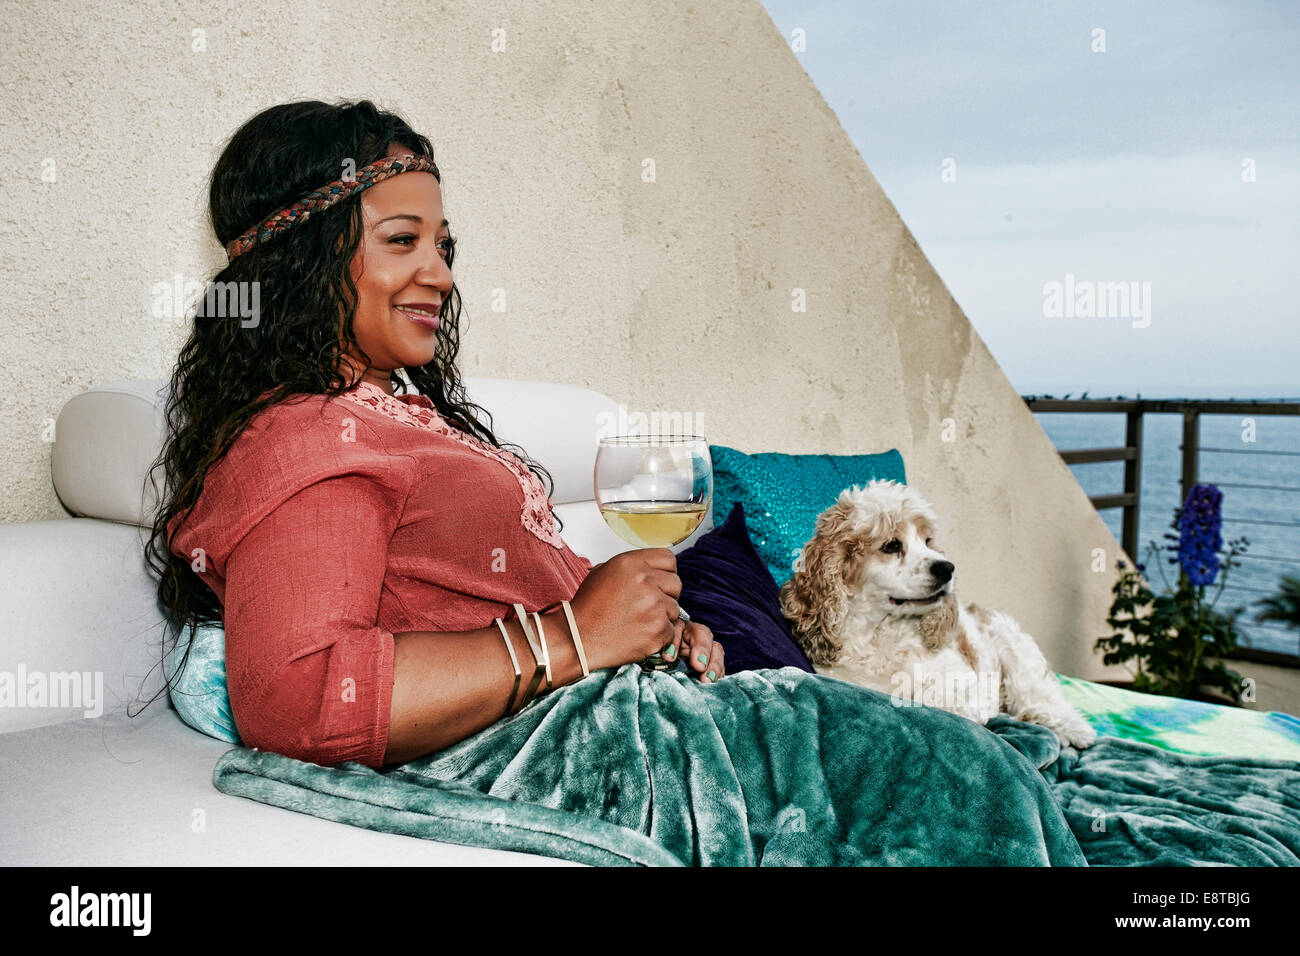 Mixed race woman drinking wine at waterfront with dog Stock Photo